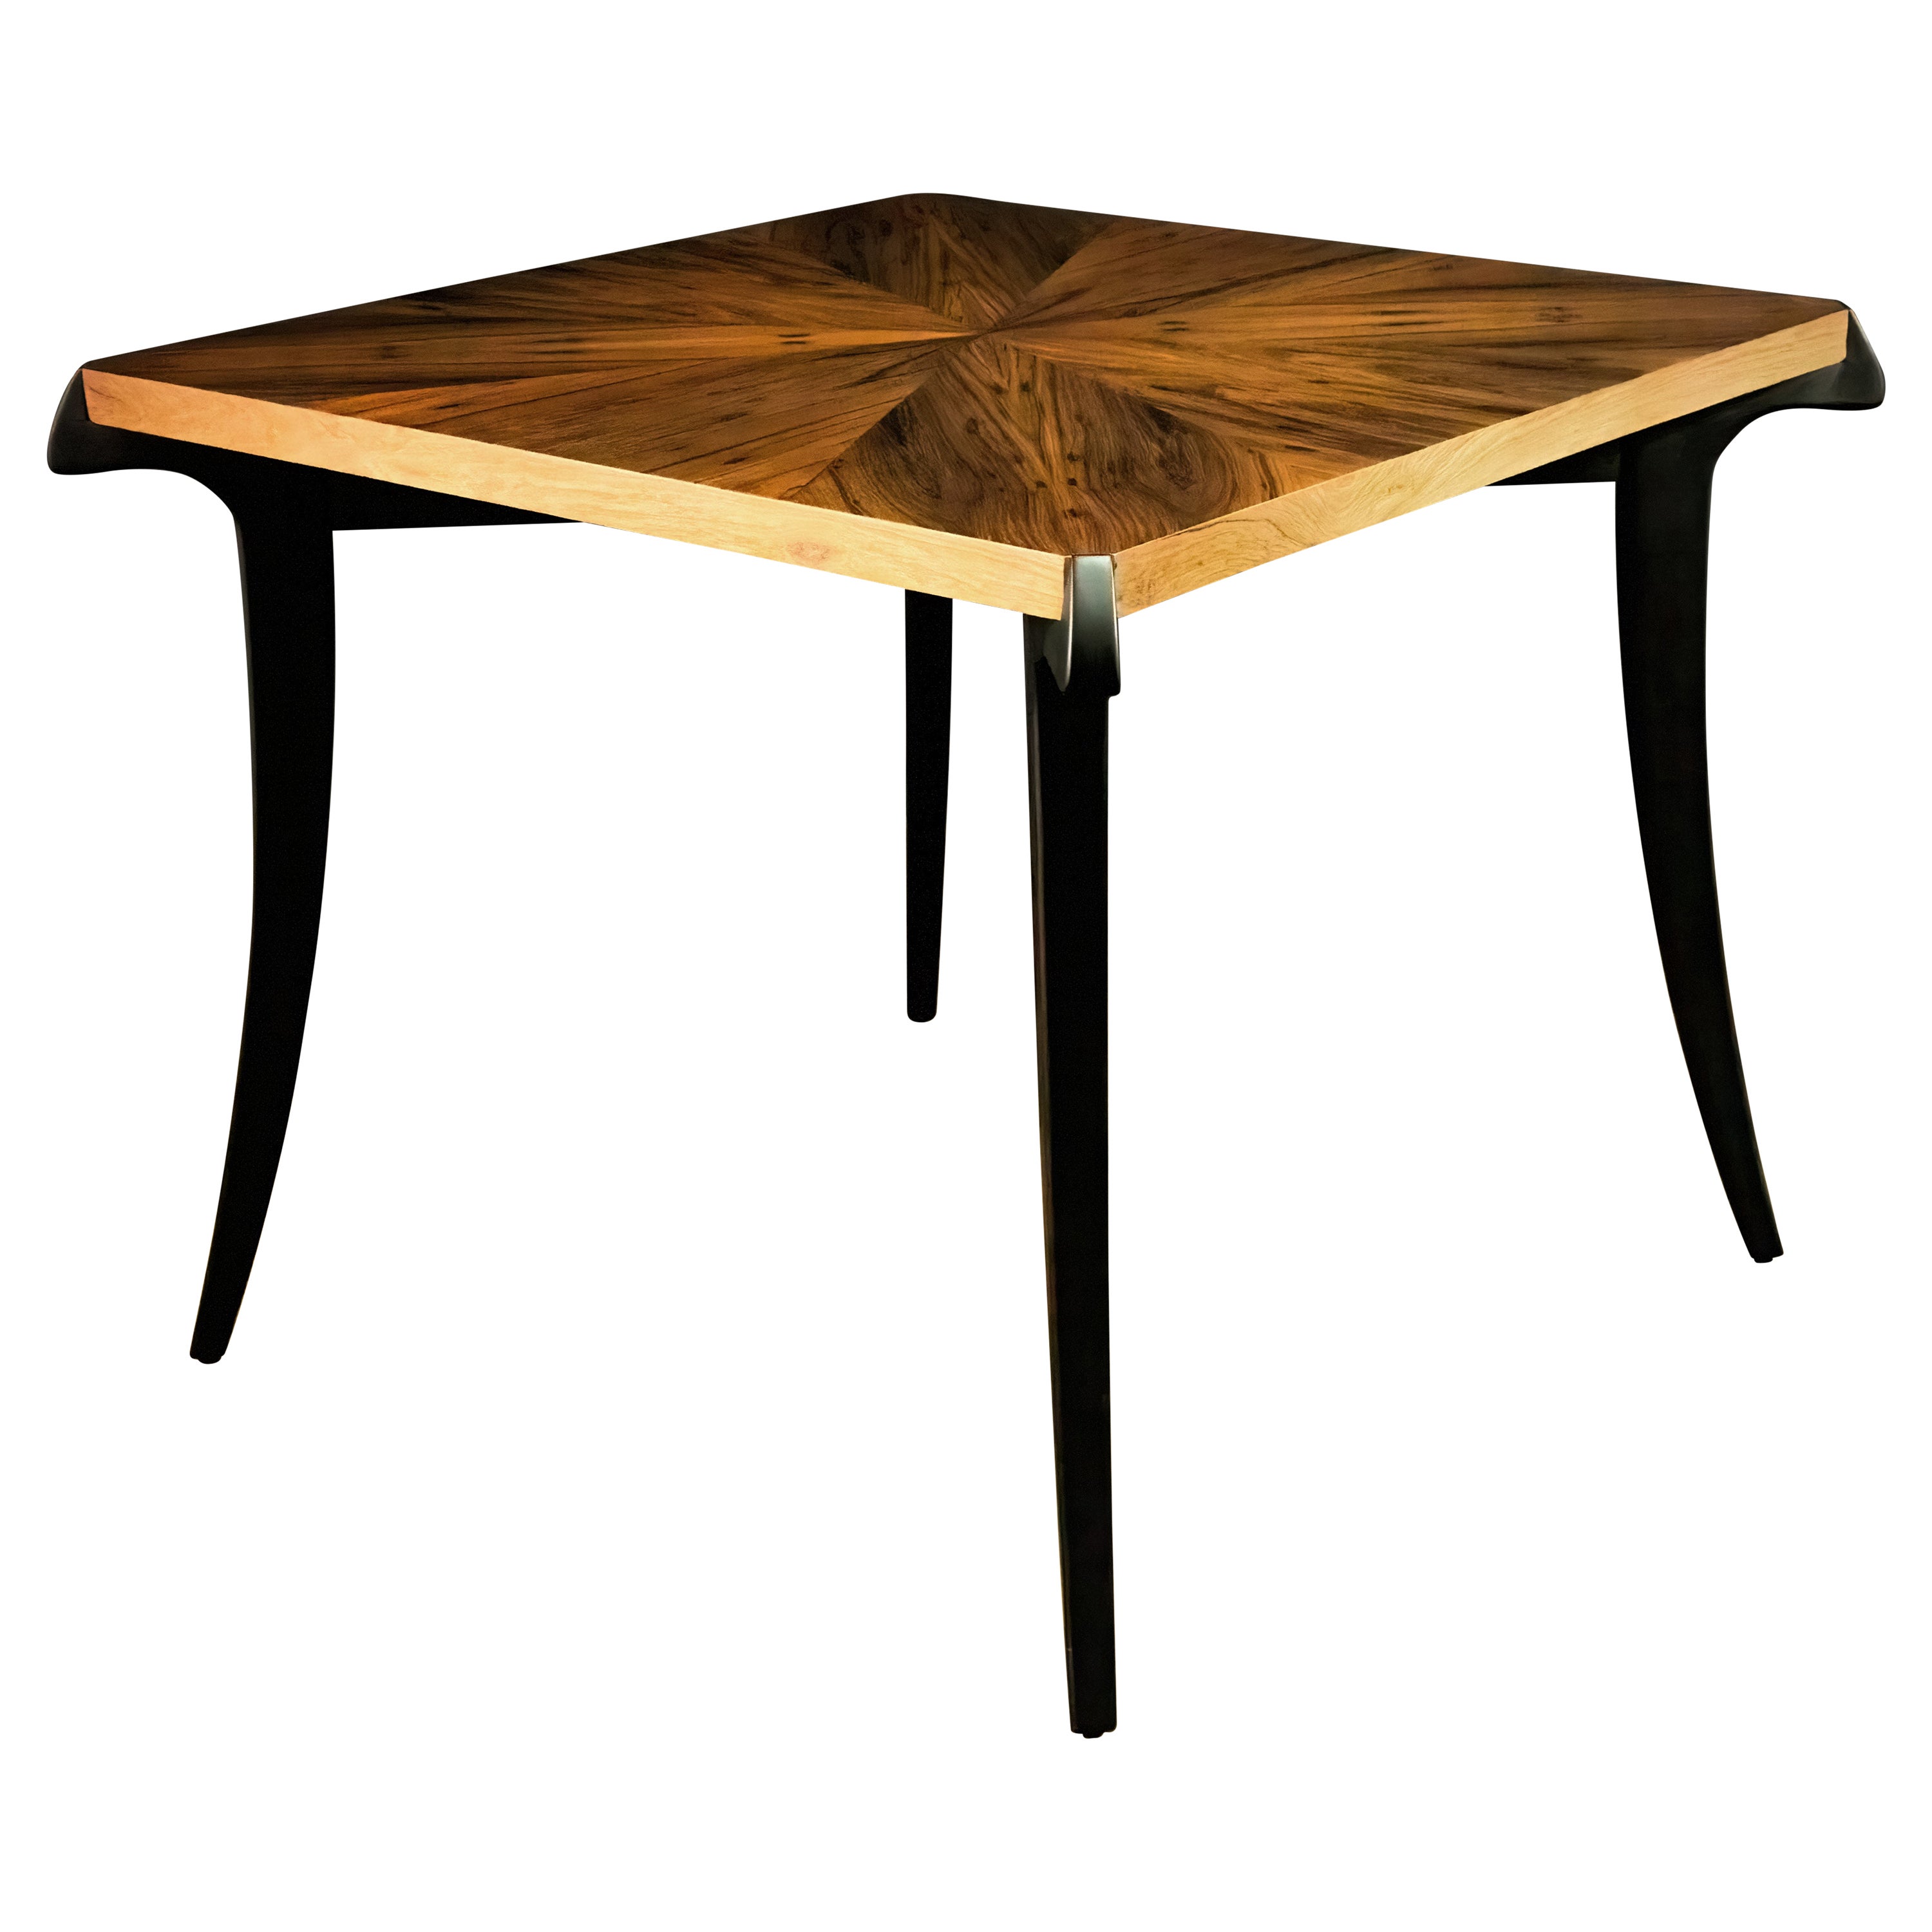 Contemporary Starburst Exotic Wood Sabre Leg Table by Costantini, Uccello